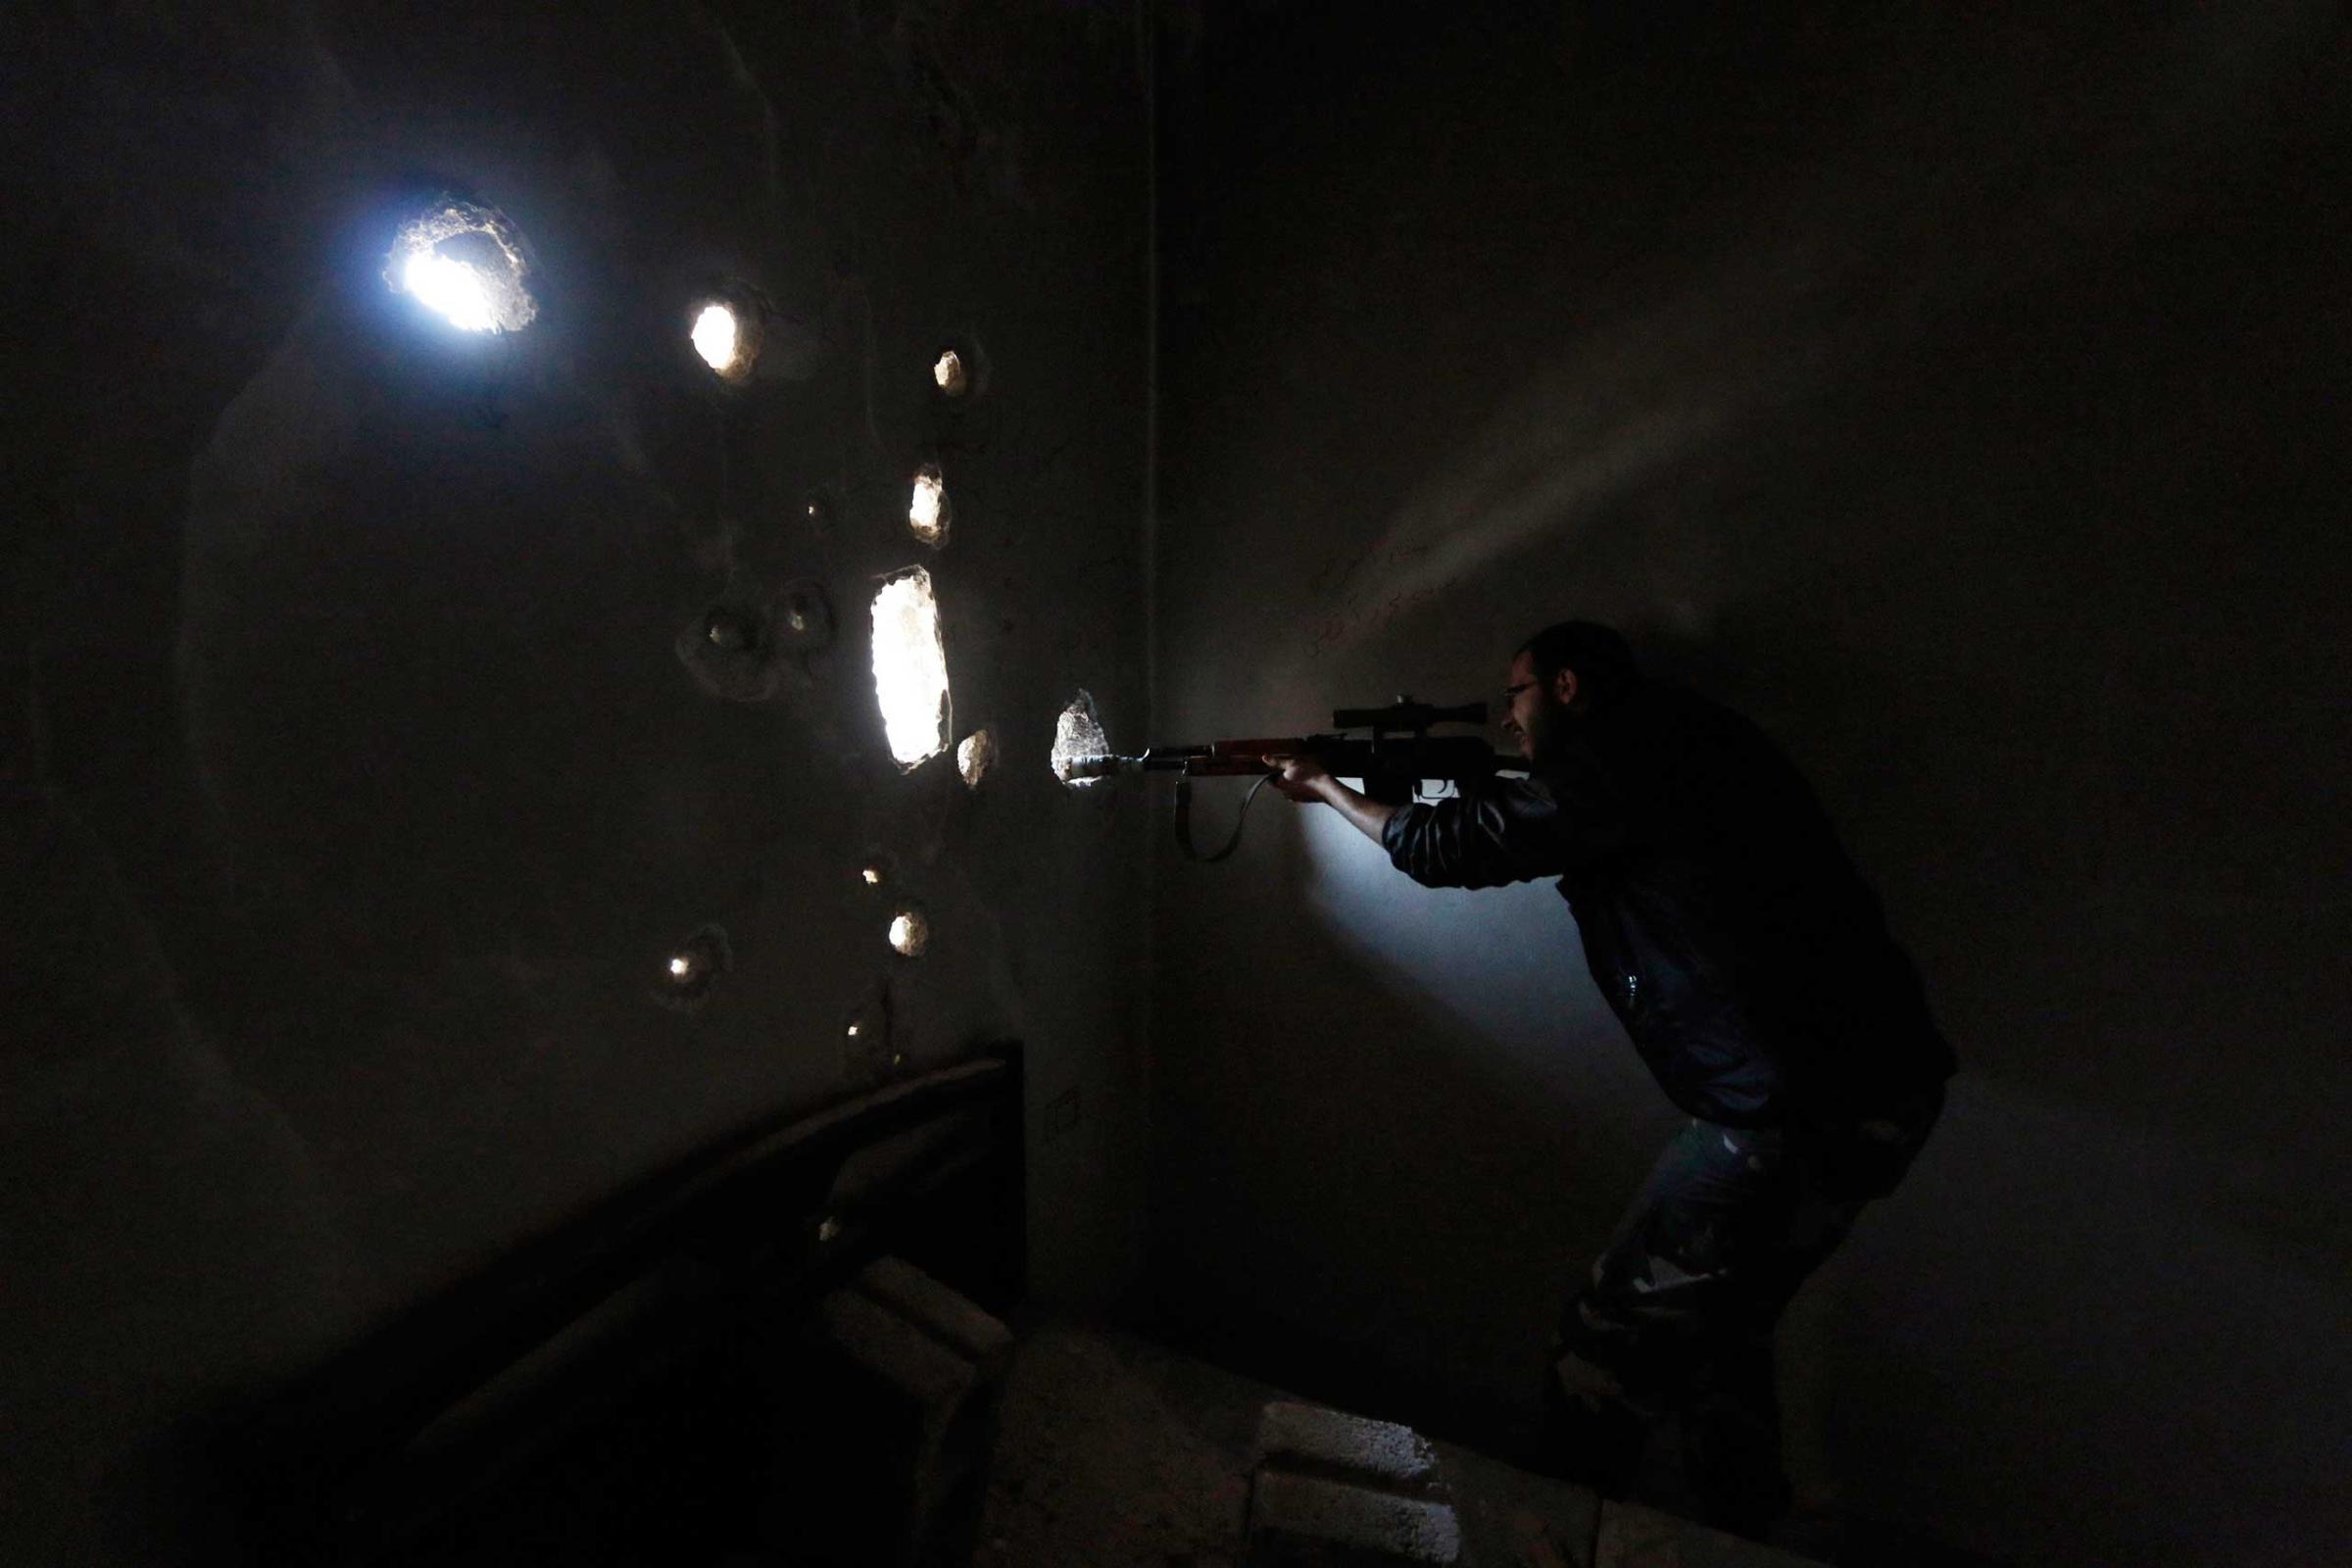 Free Syrian Army fighter carrying a weapon looks through a hole in the wall inside a damaged building on the frontline of Aleppo's Al-Ezaa neighbourhood